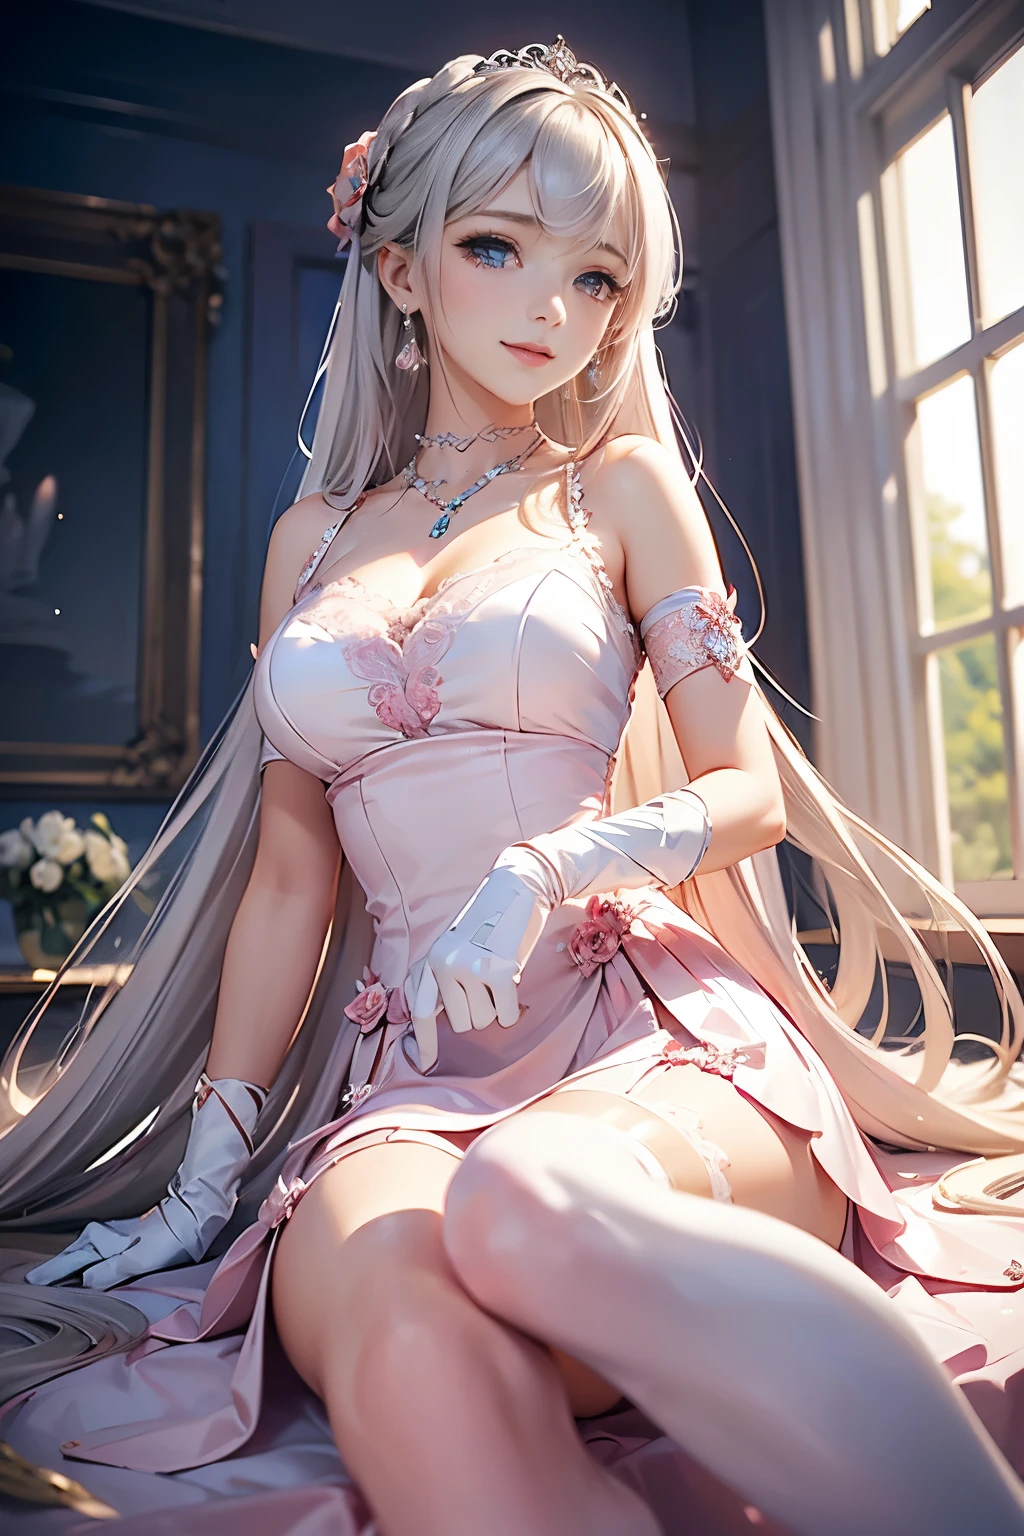 Dynamic angle,((1girl, elegant pink dresasterpiece, highest resolution)), (beautiful illustration),(semi long beautiful Silver hair),(looking at the viewer),innocent smile,cinematic lighting,white over-kneehighs,Lace chalker, wristband, diamond necklace,wristband, white fingerless gloves, earrings,day,blue sky,beautiful flower park